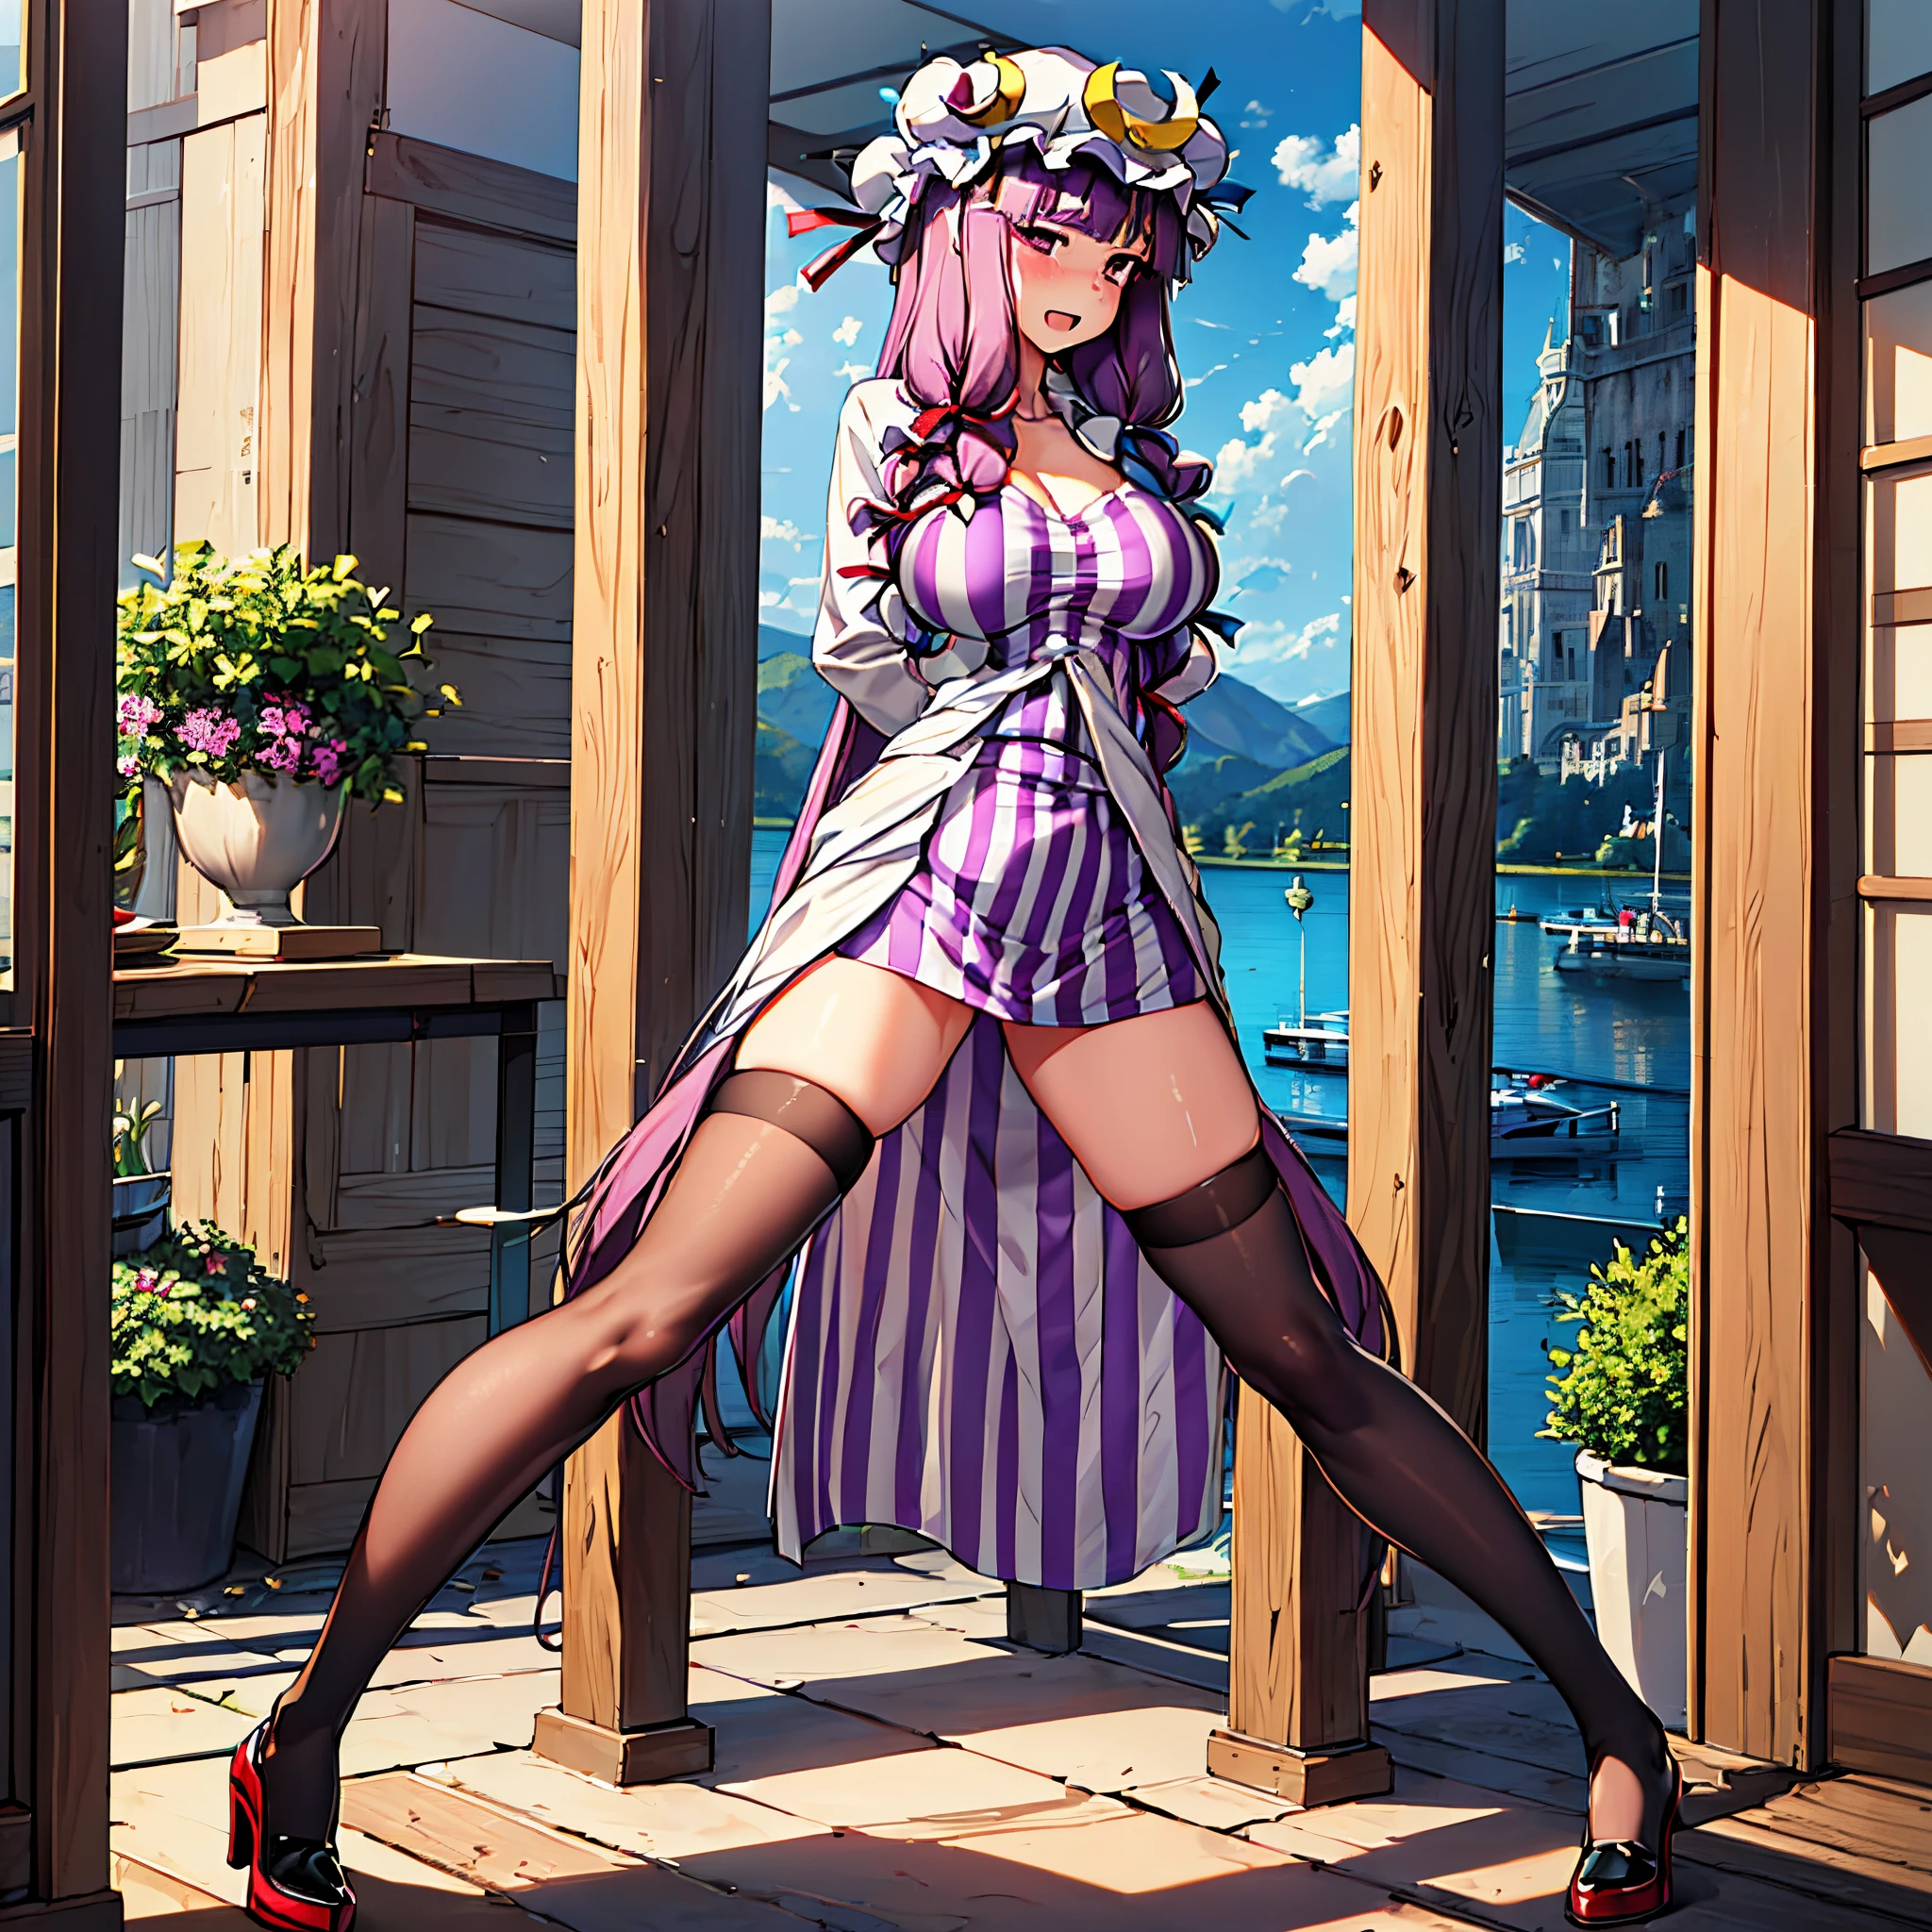 (solo Patchouli standing with open thin legs wide:1.8), (open slim thighs:1.5), solo, (standing at lakeside forest:2.0), BREAK, (thin long legs:1.5), (short torso:1.5), (large perky breasts:1.4), (thin waist:1.2), (arms behind back:1.5), BREAK, (long black thighhighs:1.4), (very short skirt:1.8), highheels, (pigeon toed:1.2), BREAK, (long hair flapping in wind:1.5), BREAK, smile for viewer, nose blush, open mouth, heavy breathing, BREAK, full body, masterpiece